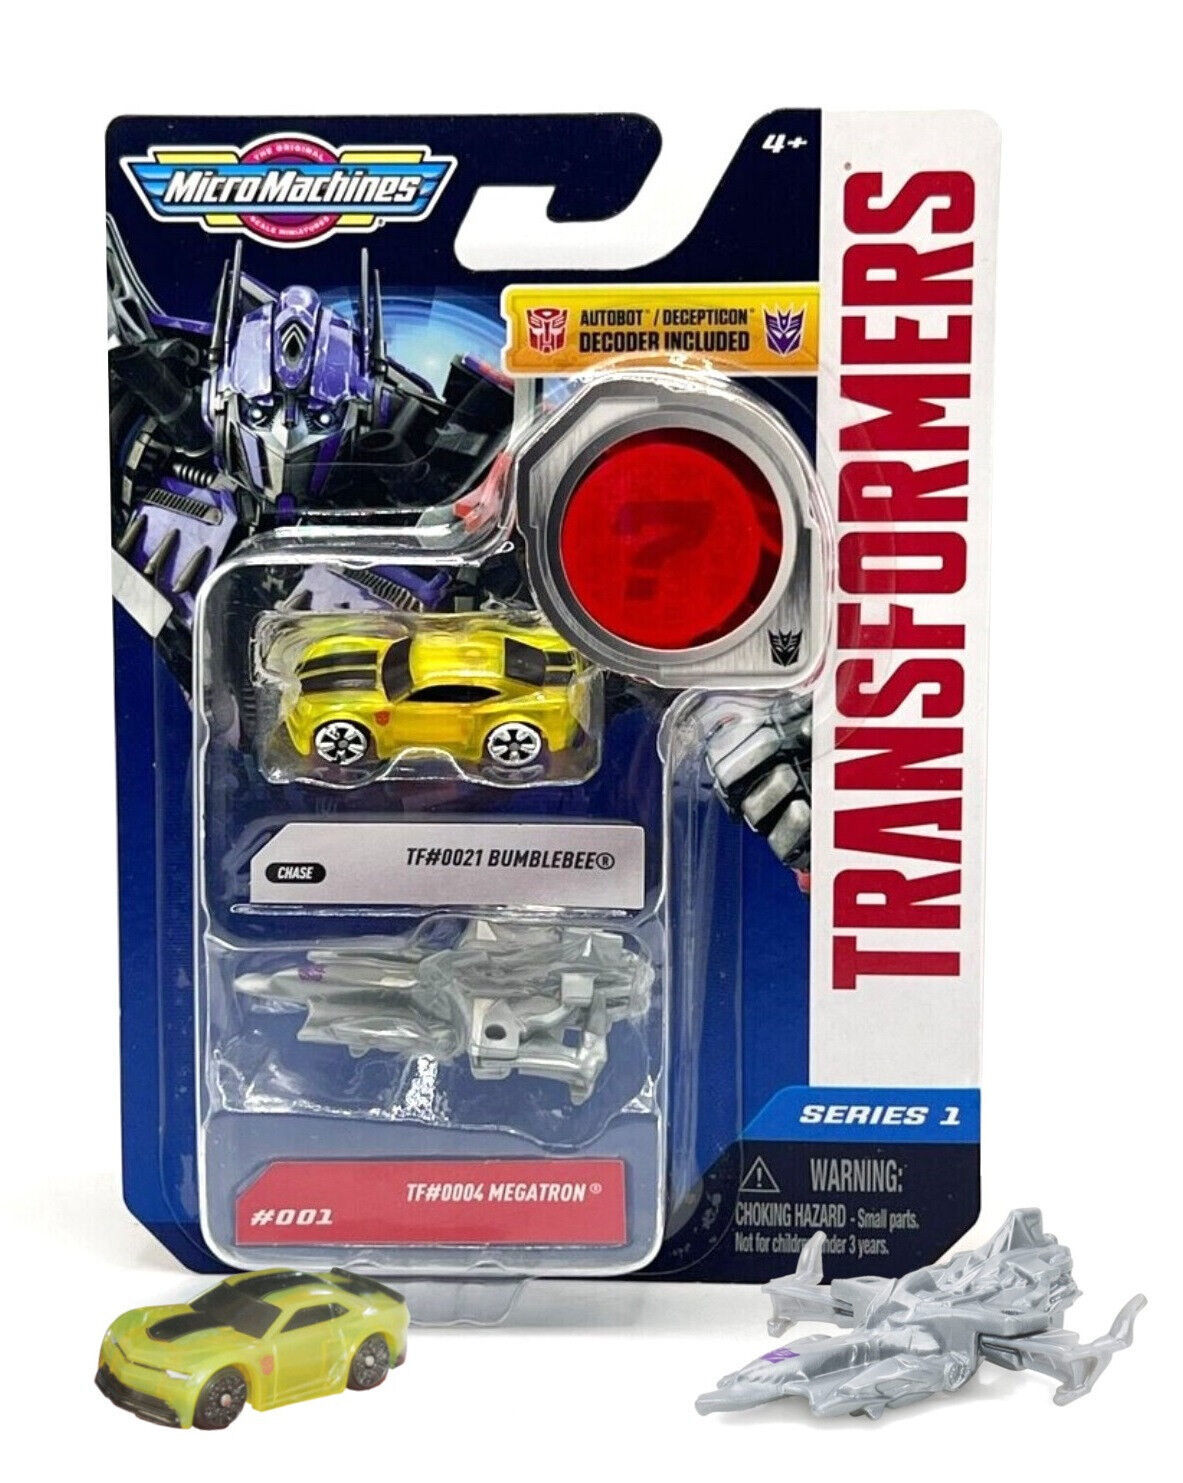 Primary image for MicroMachines Transformers TF#0021 Chase Bumblebee & TF#0004 Megatron MOC